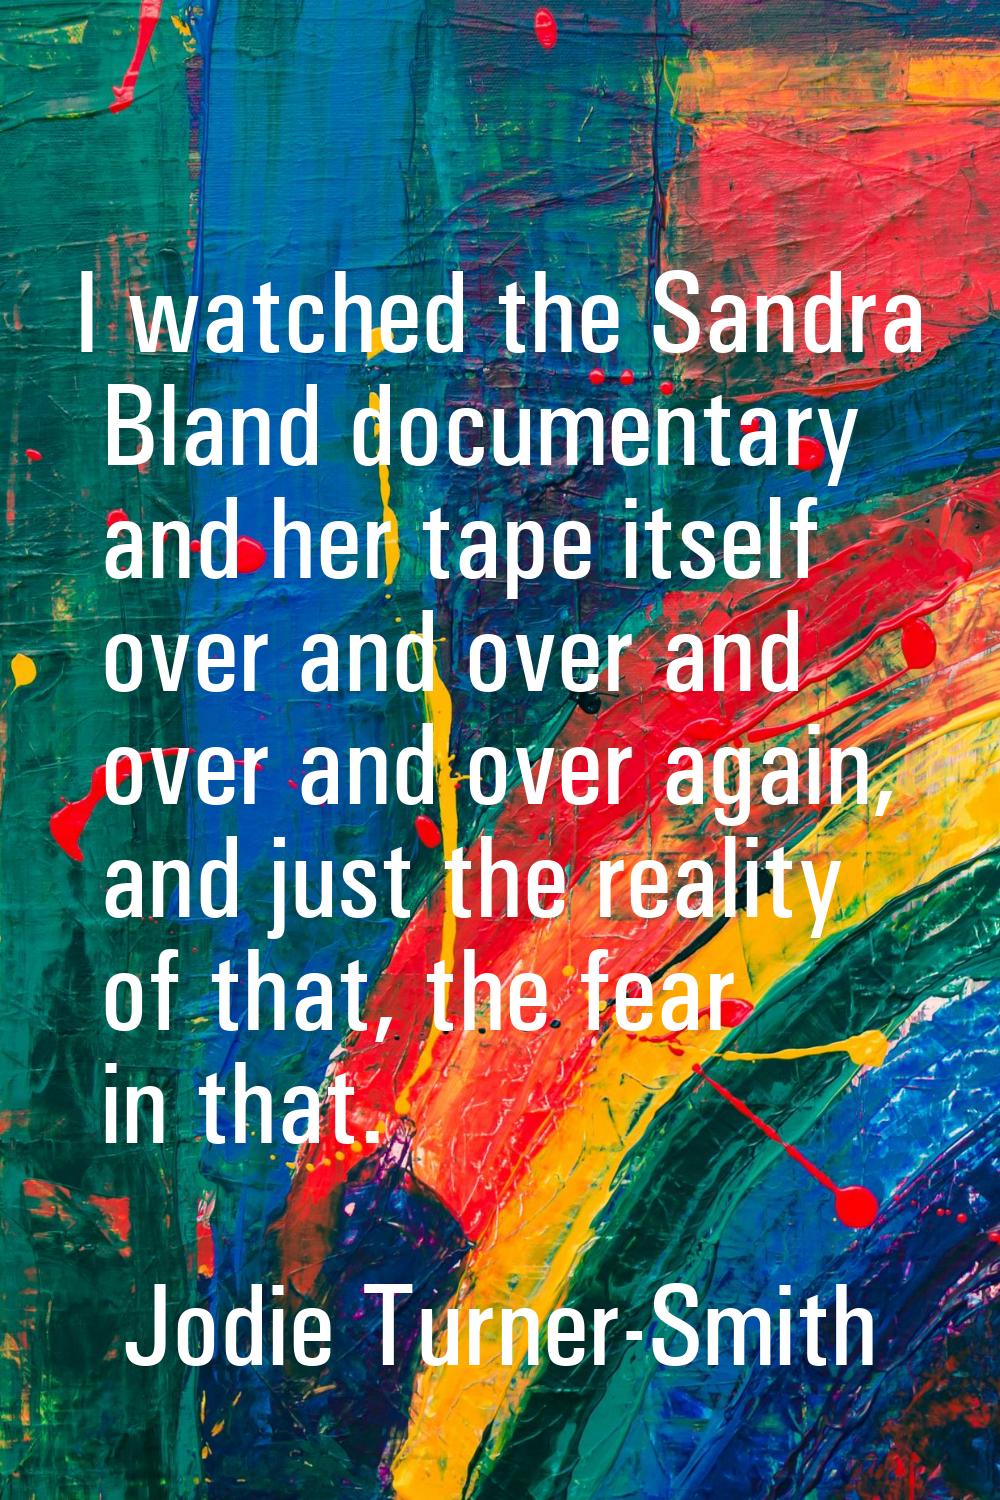 I watched the Sandra Bland documentary and her tape itself over and over and over and over again, a